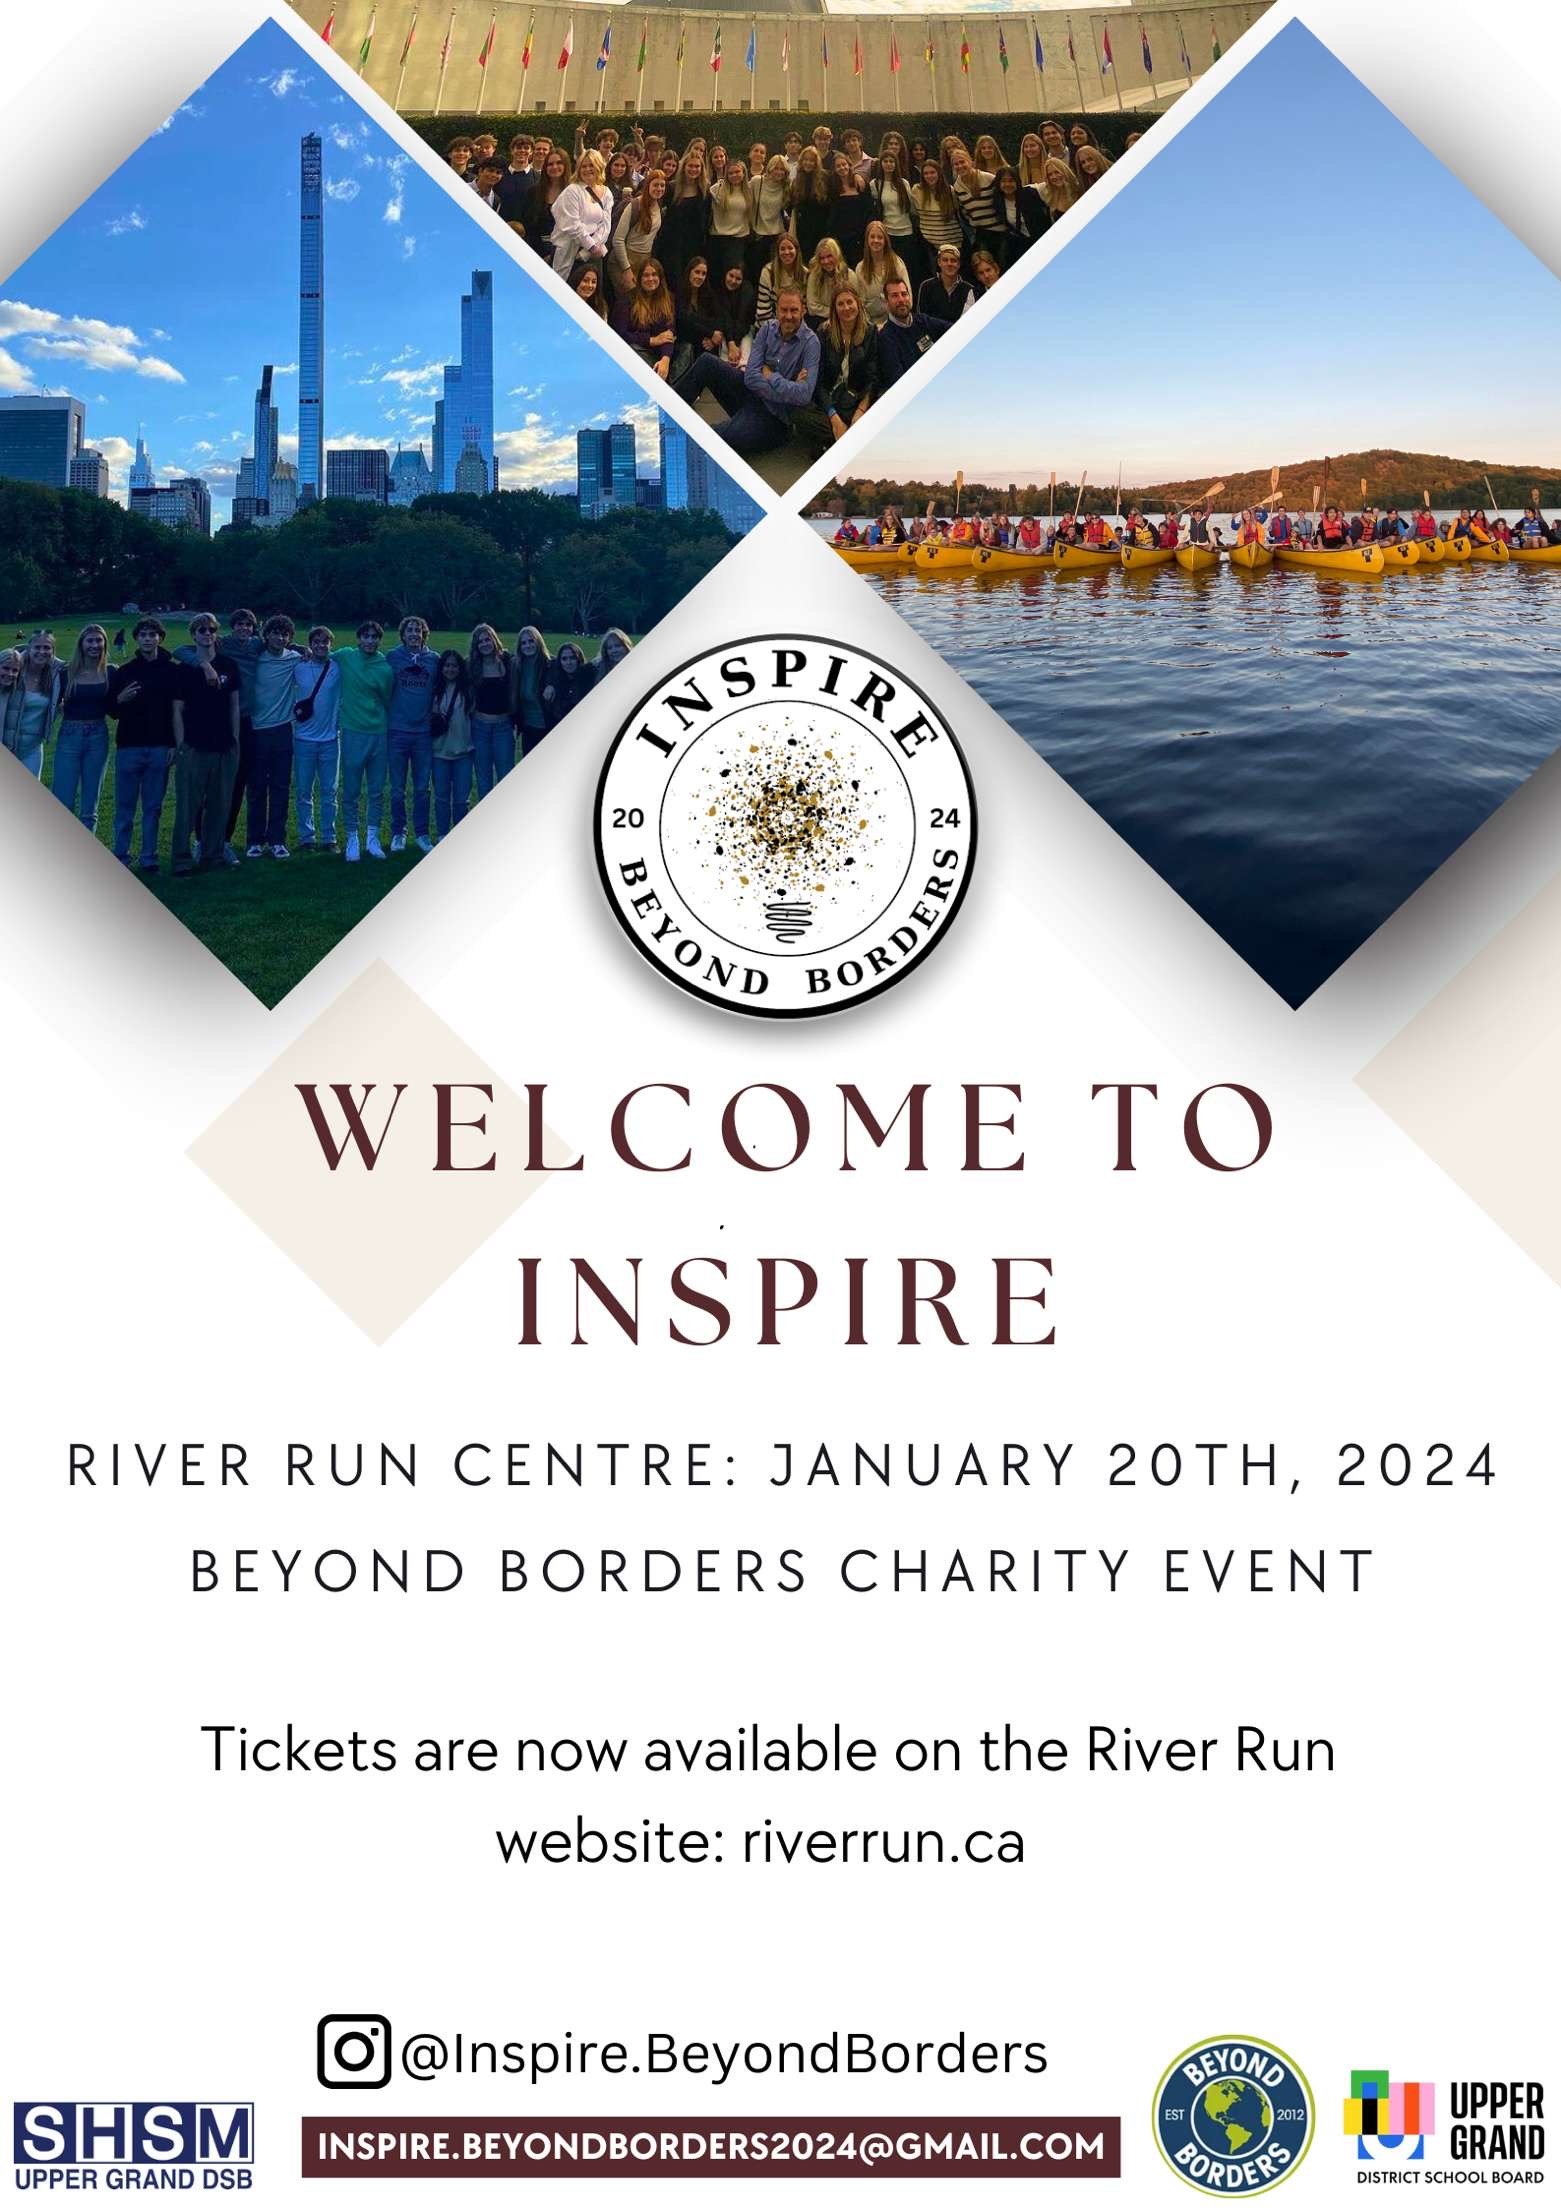 This photo features a promotional poster for this year's Beyond Borders charity event.